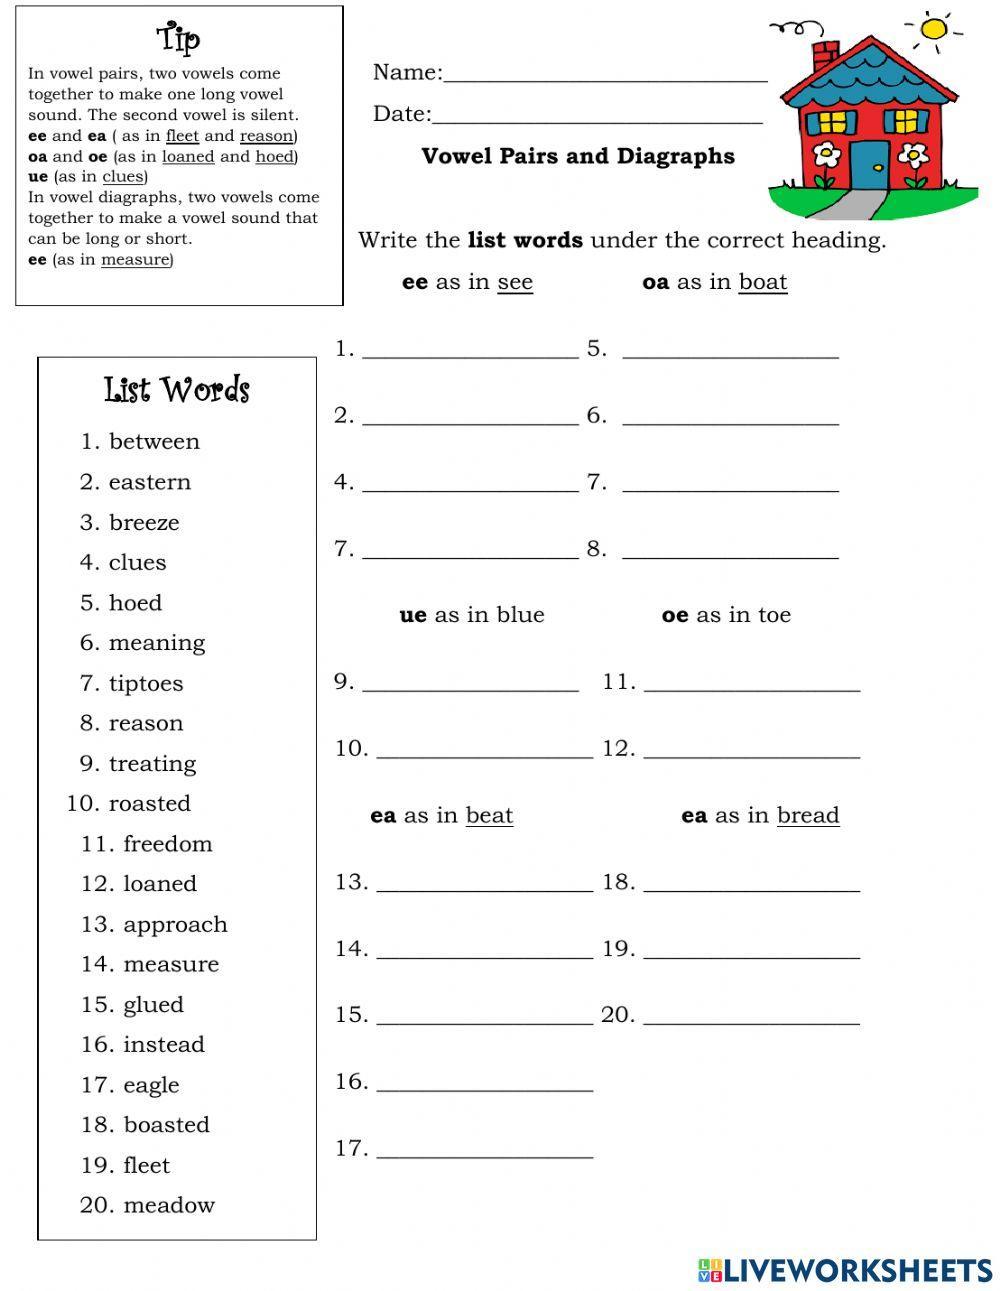 Vowel Pairs and Diagraphs